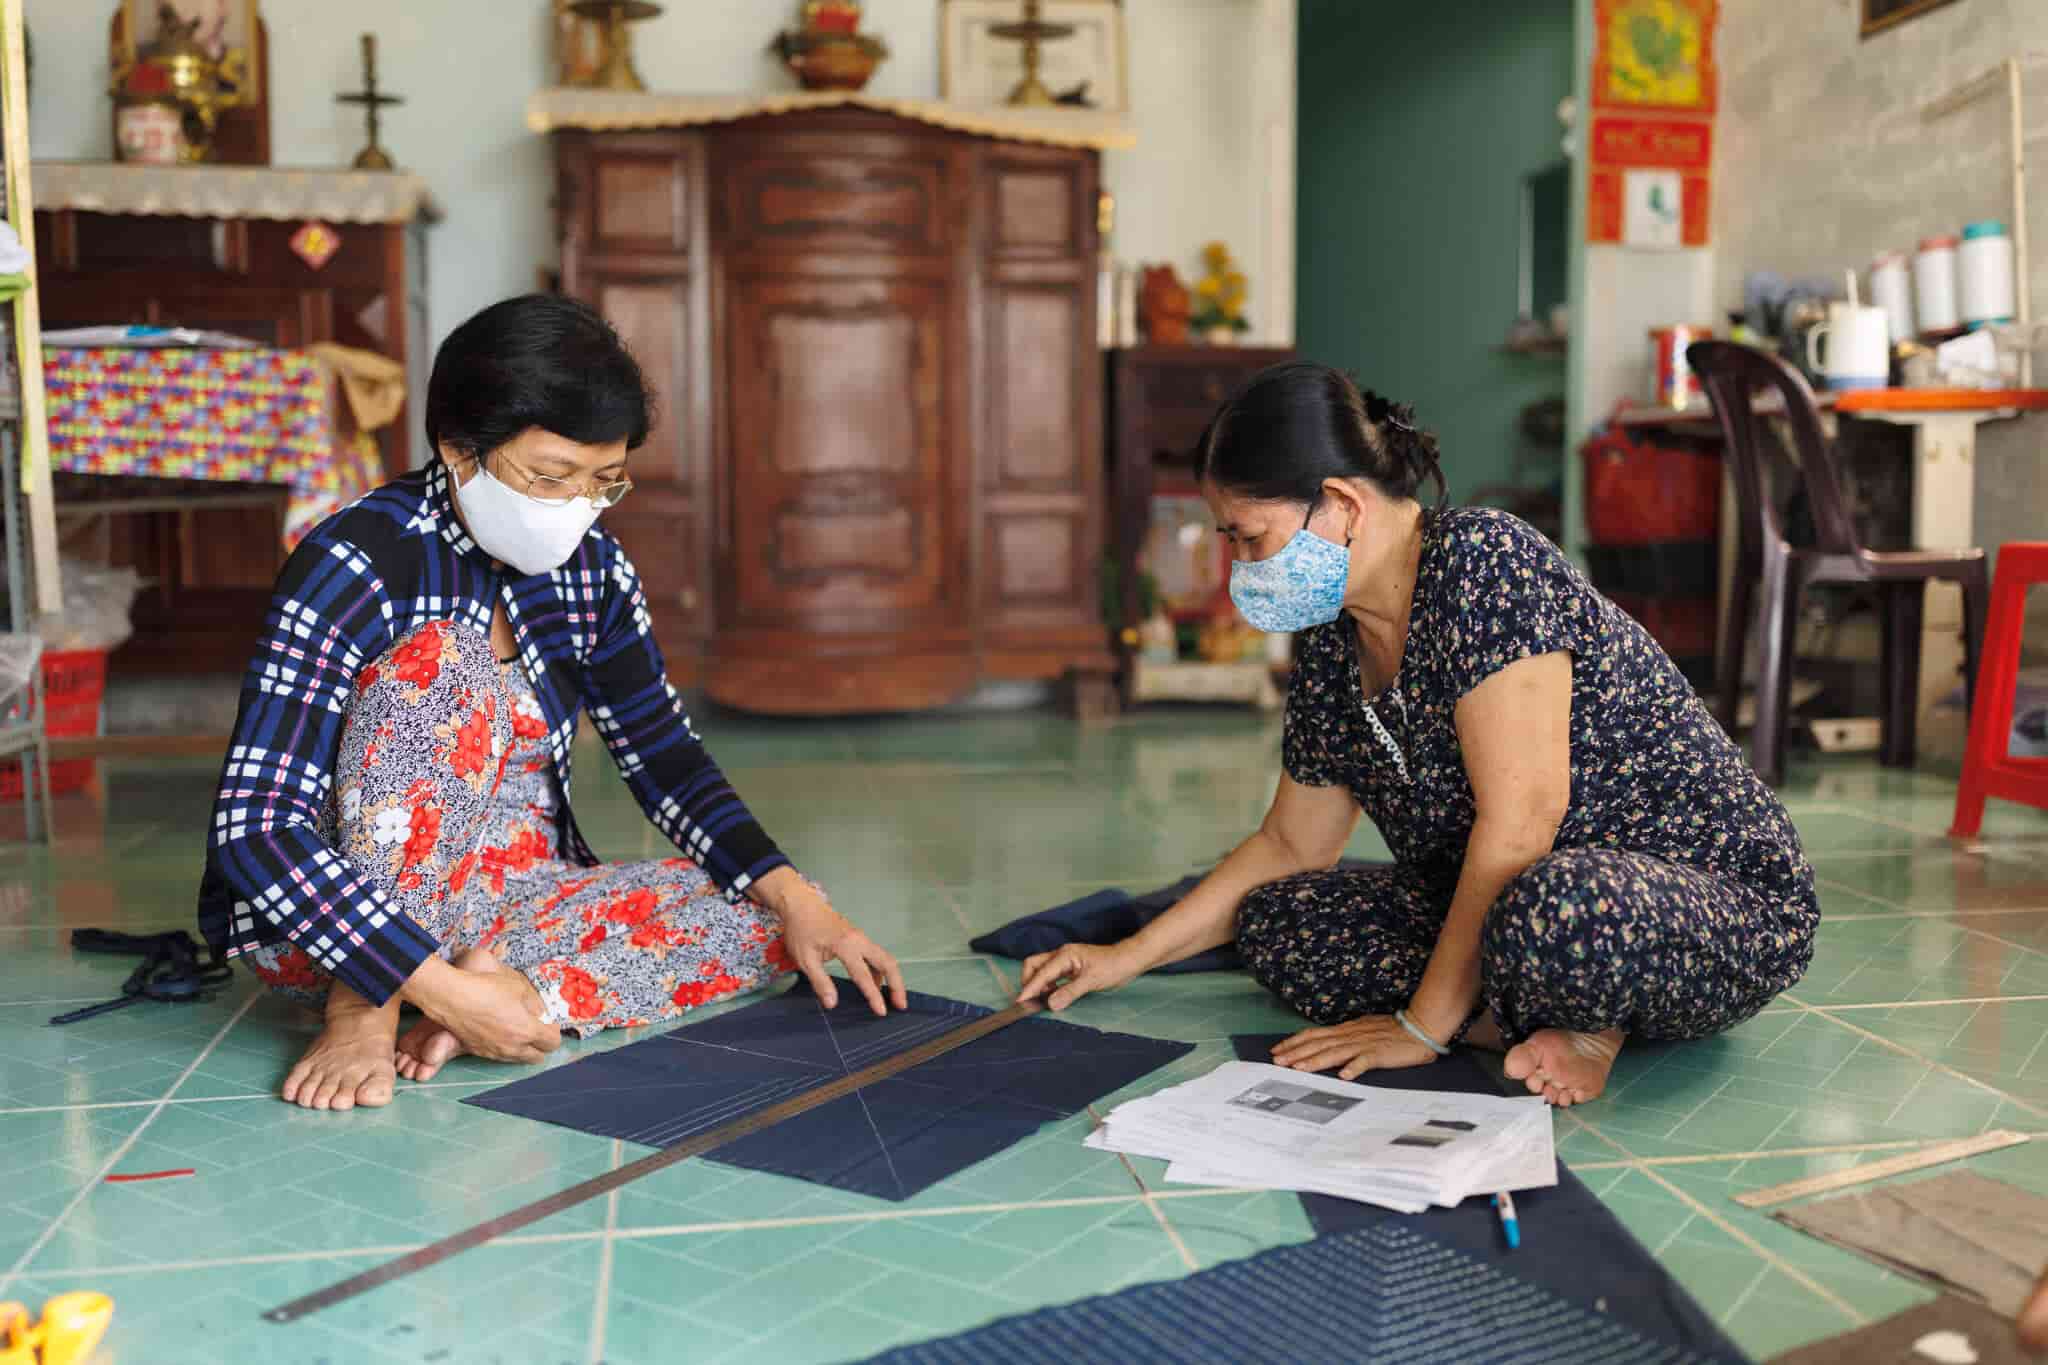 Two women measure and cut patterns for making quilts.